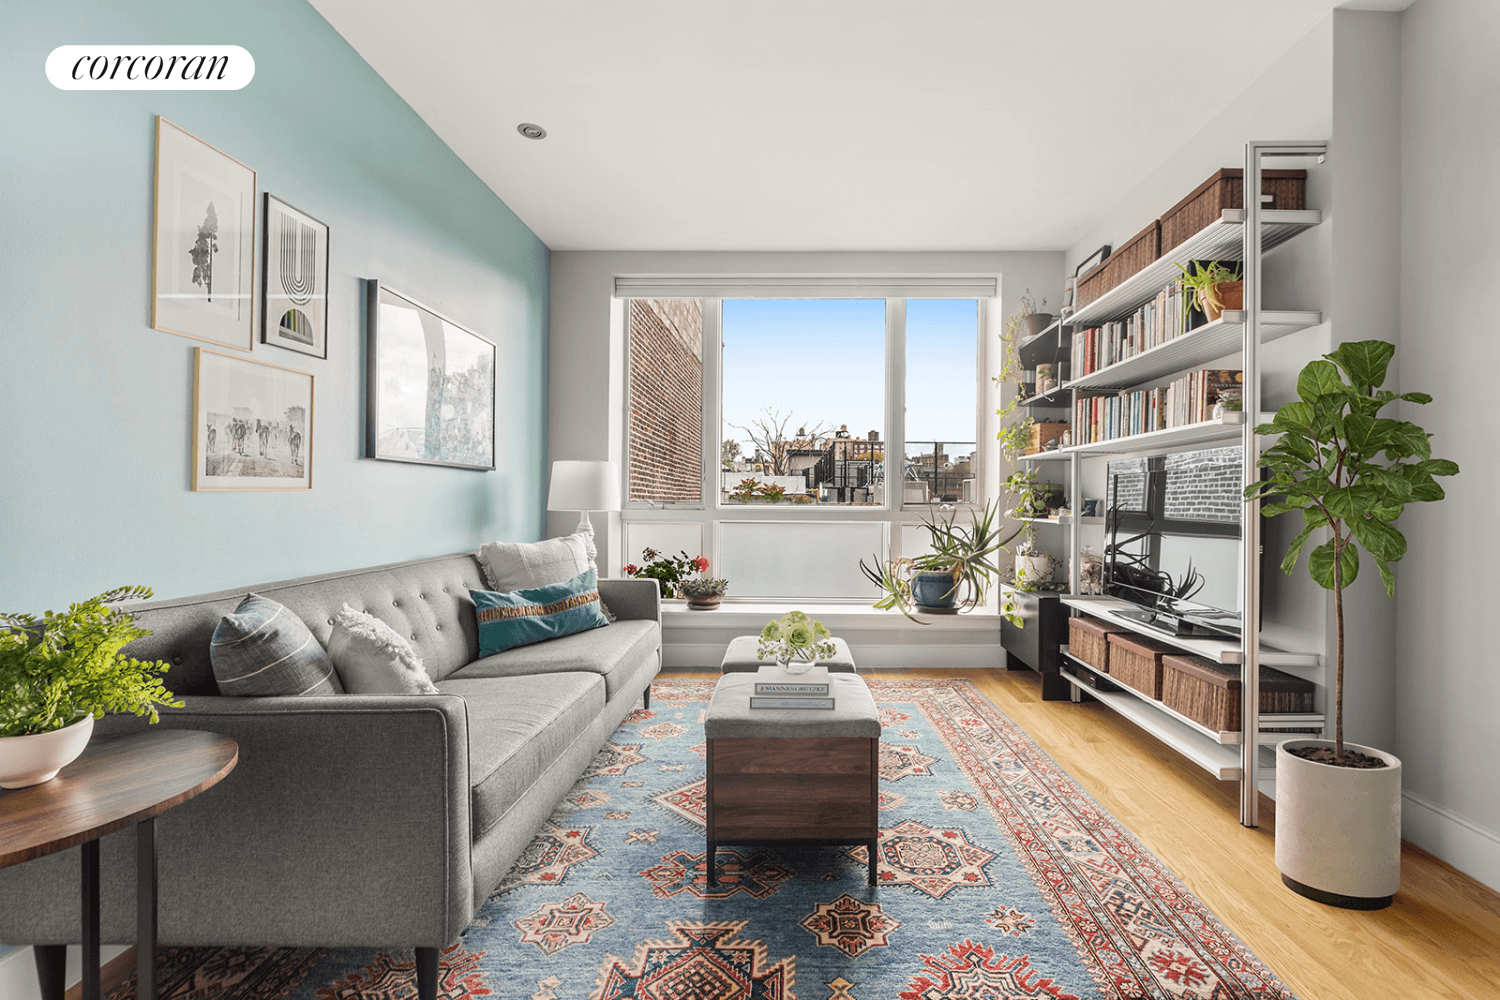 Enjoy an amazing oasis in prime Prospect Heights, offering 2 spacious stories, walls of windows for abundant light, and 3 outdoor spaces featuring balconies on both levels, and a large ...